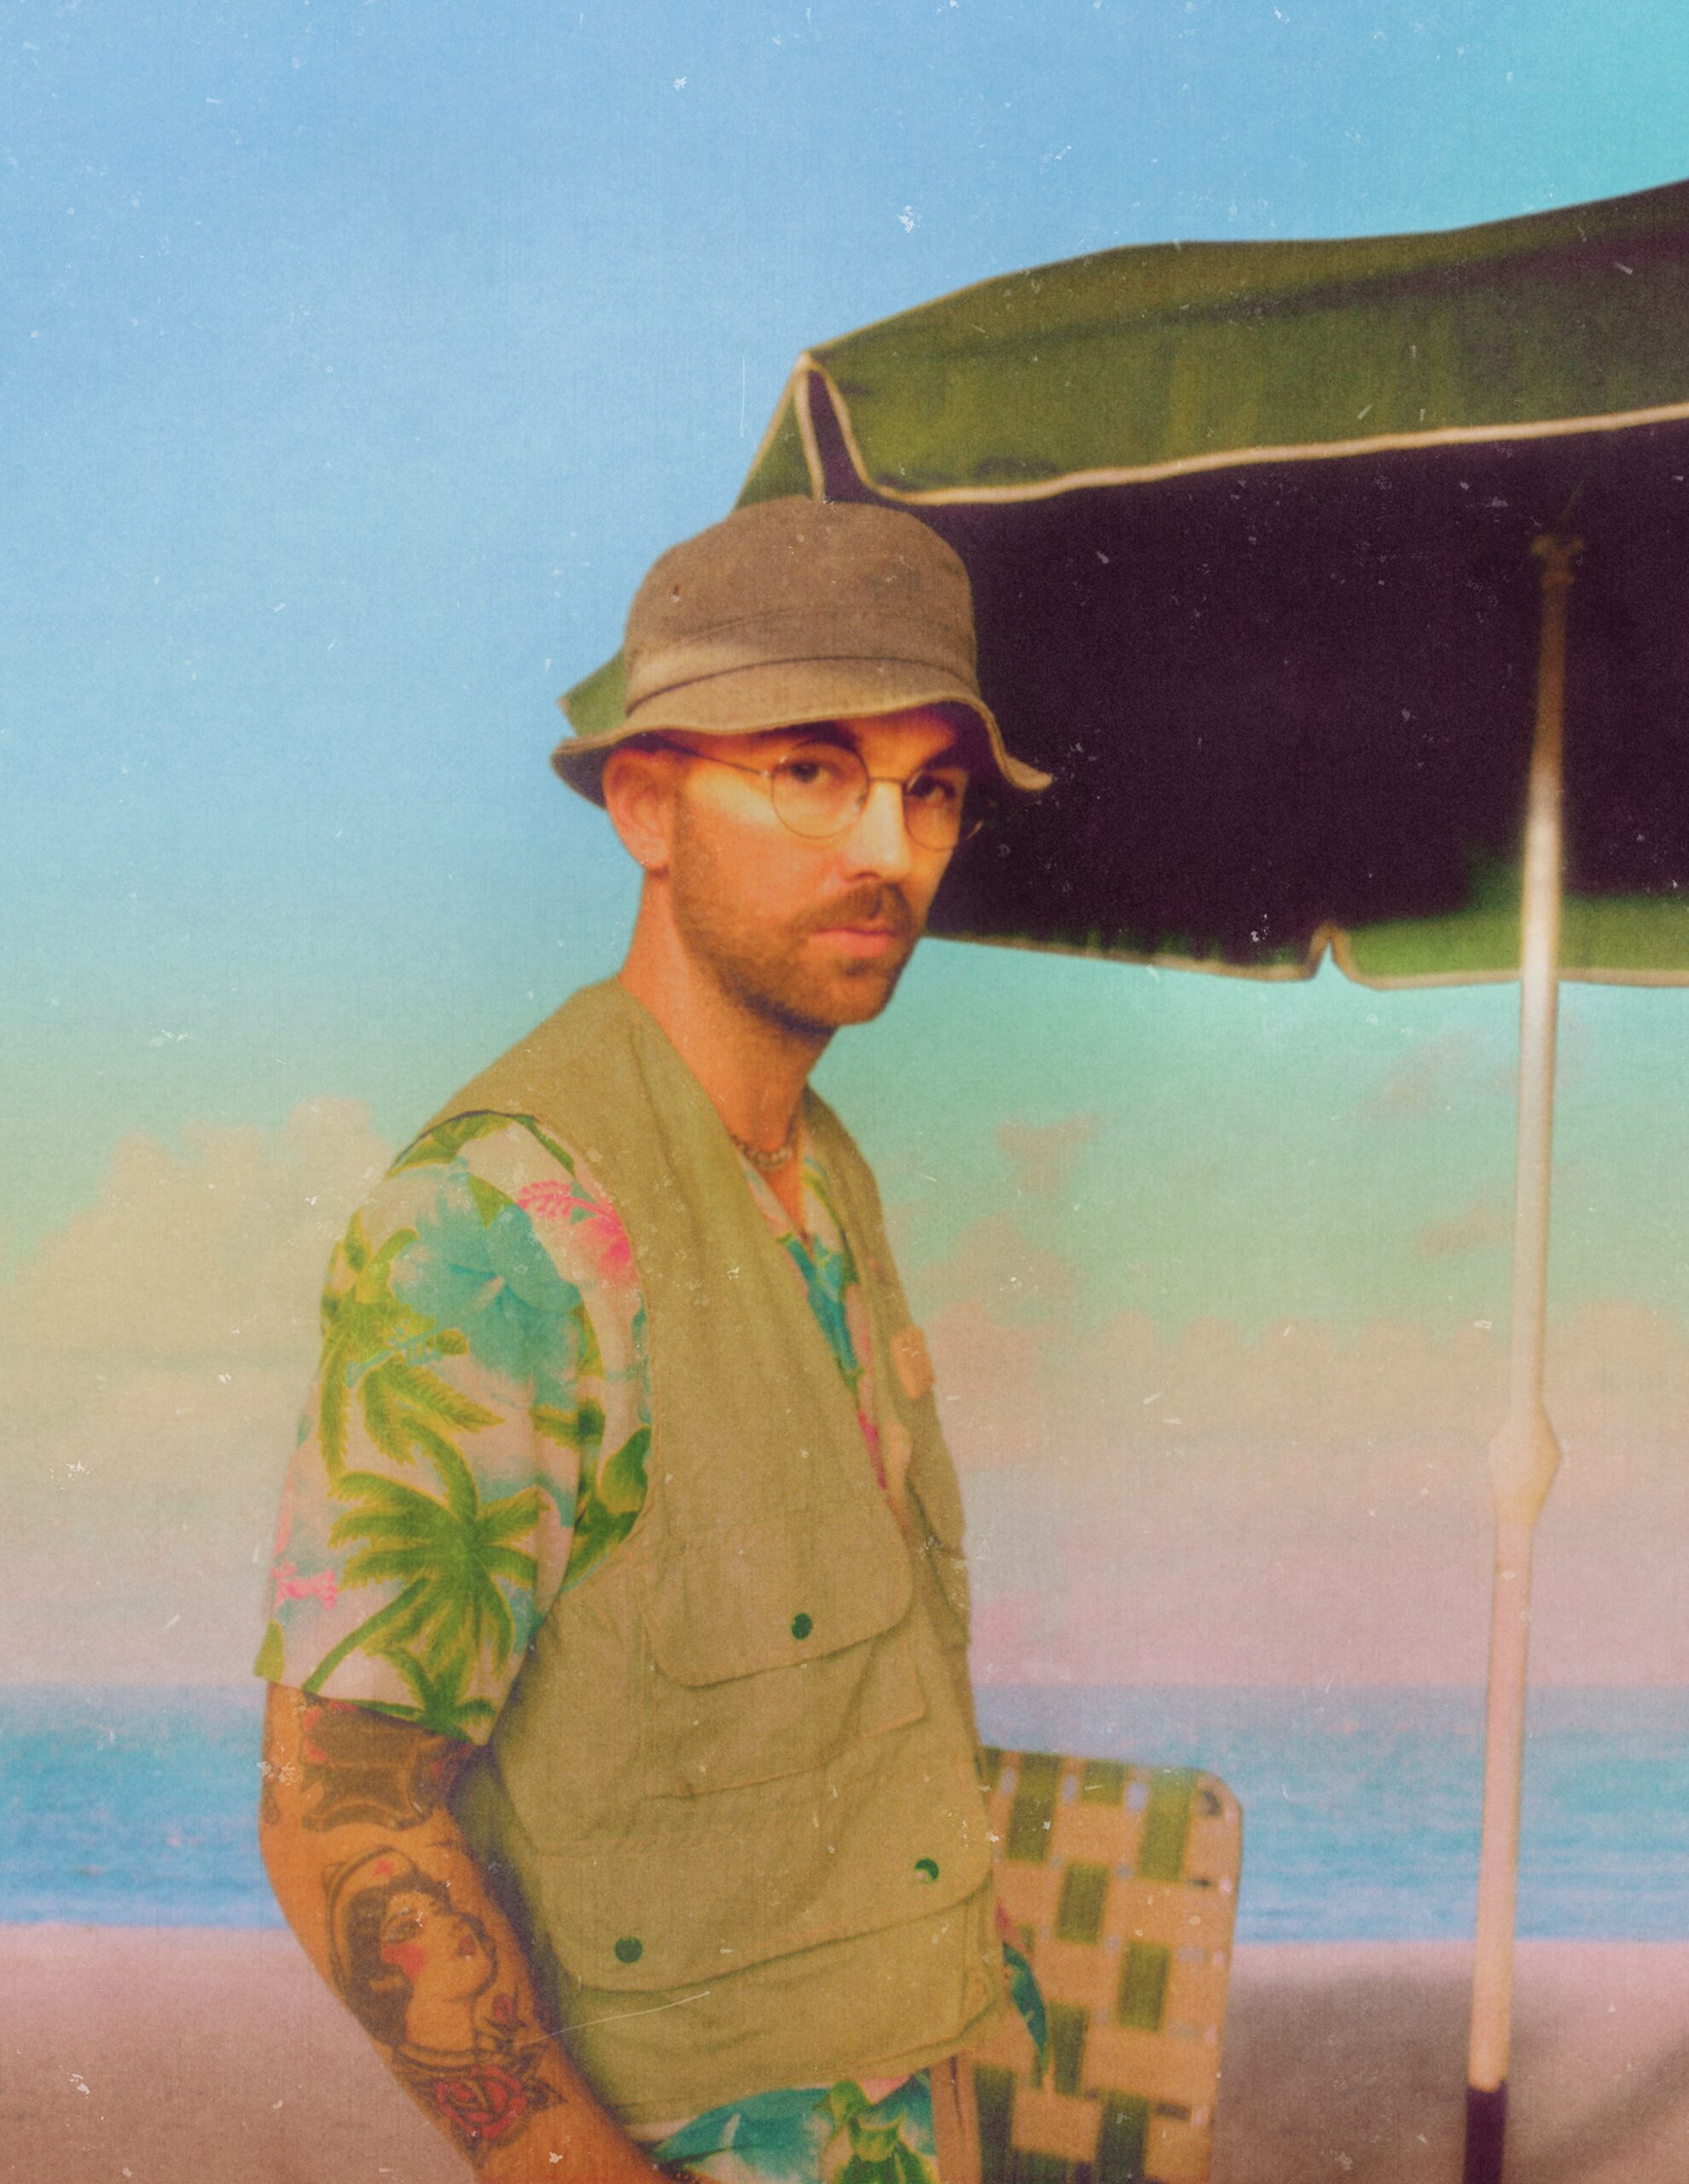 SONREAL REVEALS HIGHLY ANTICIPATED EP “I CAN’T MAKE THIS UP”